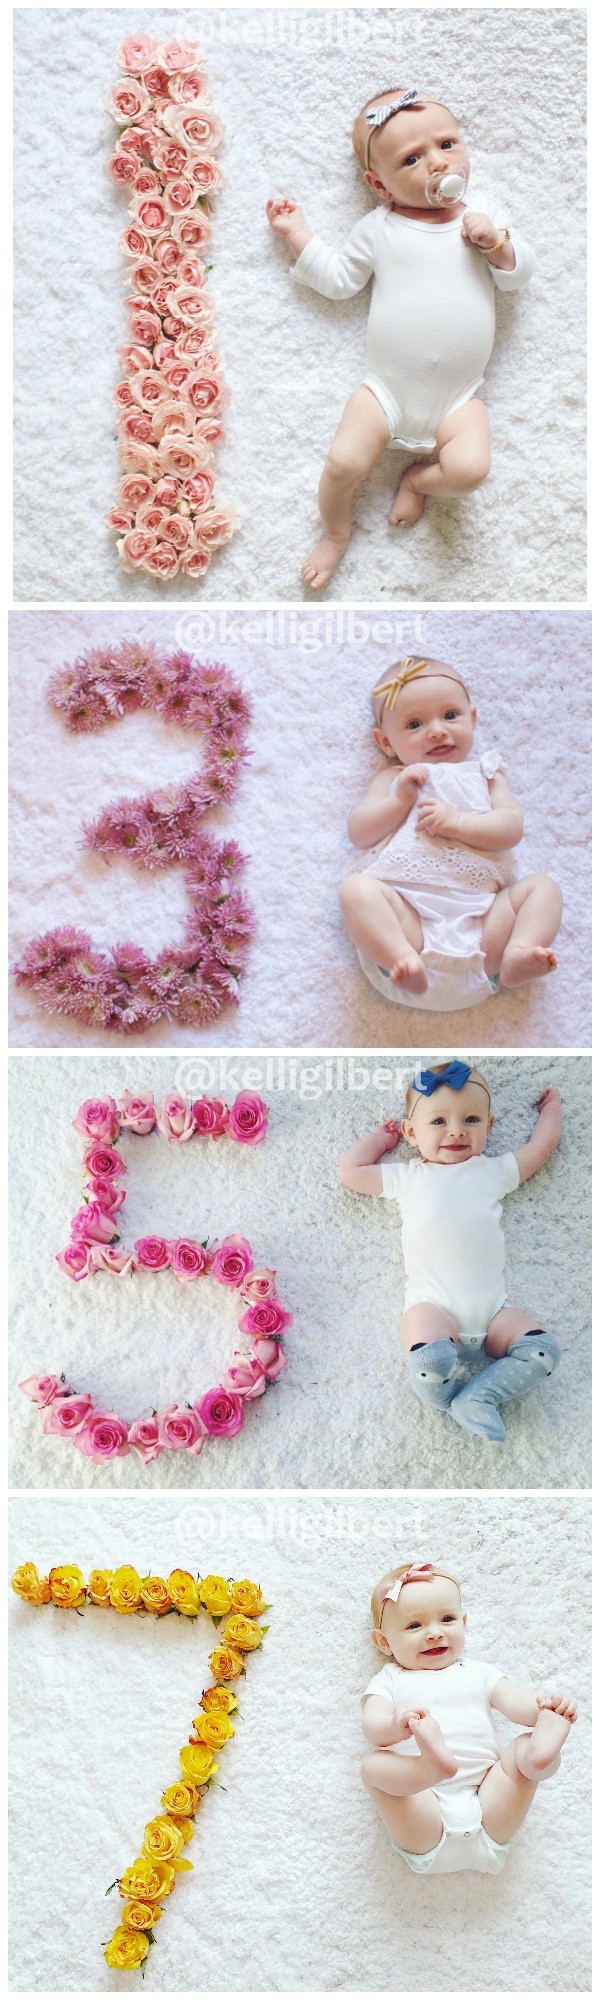 Ideas for monthly baby photos with flower petals.